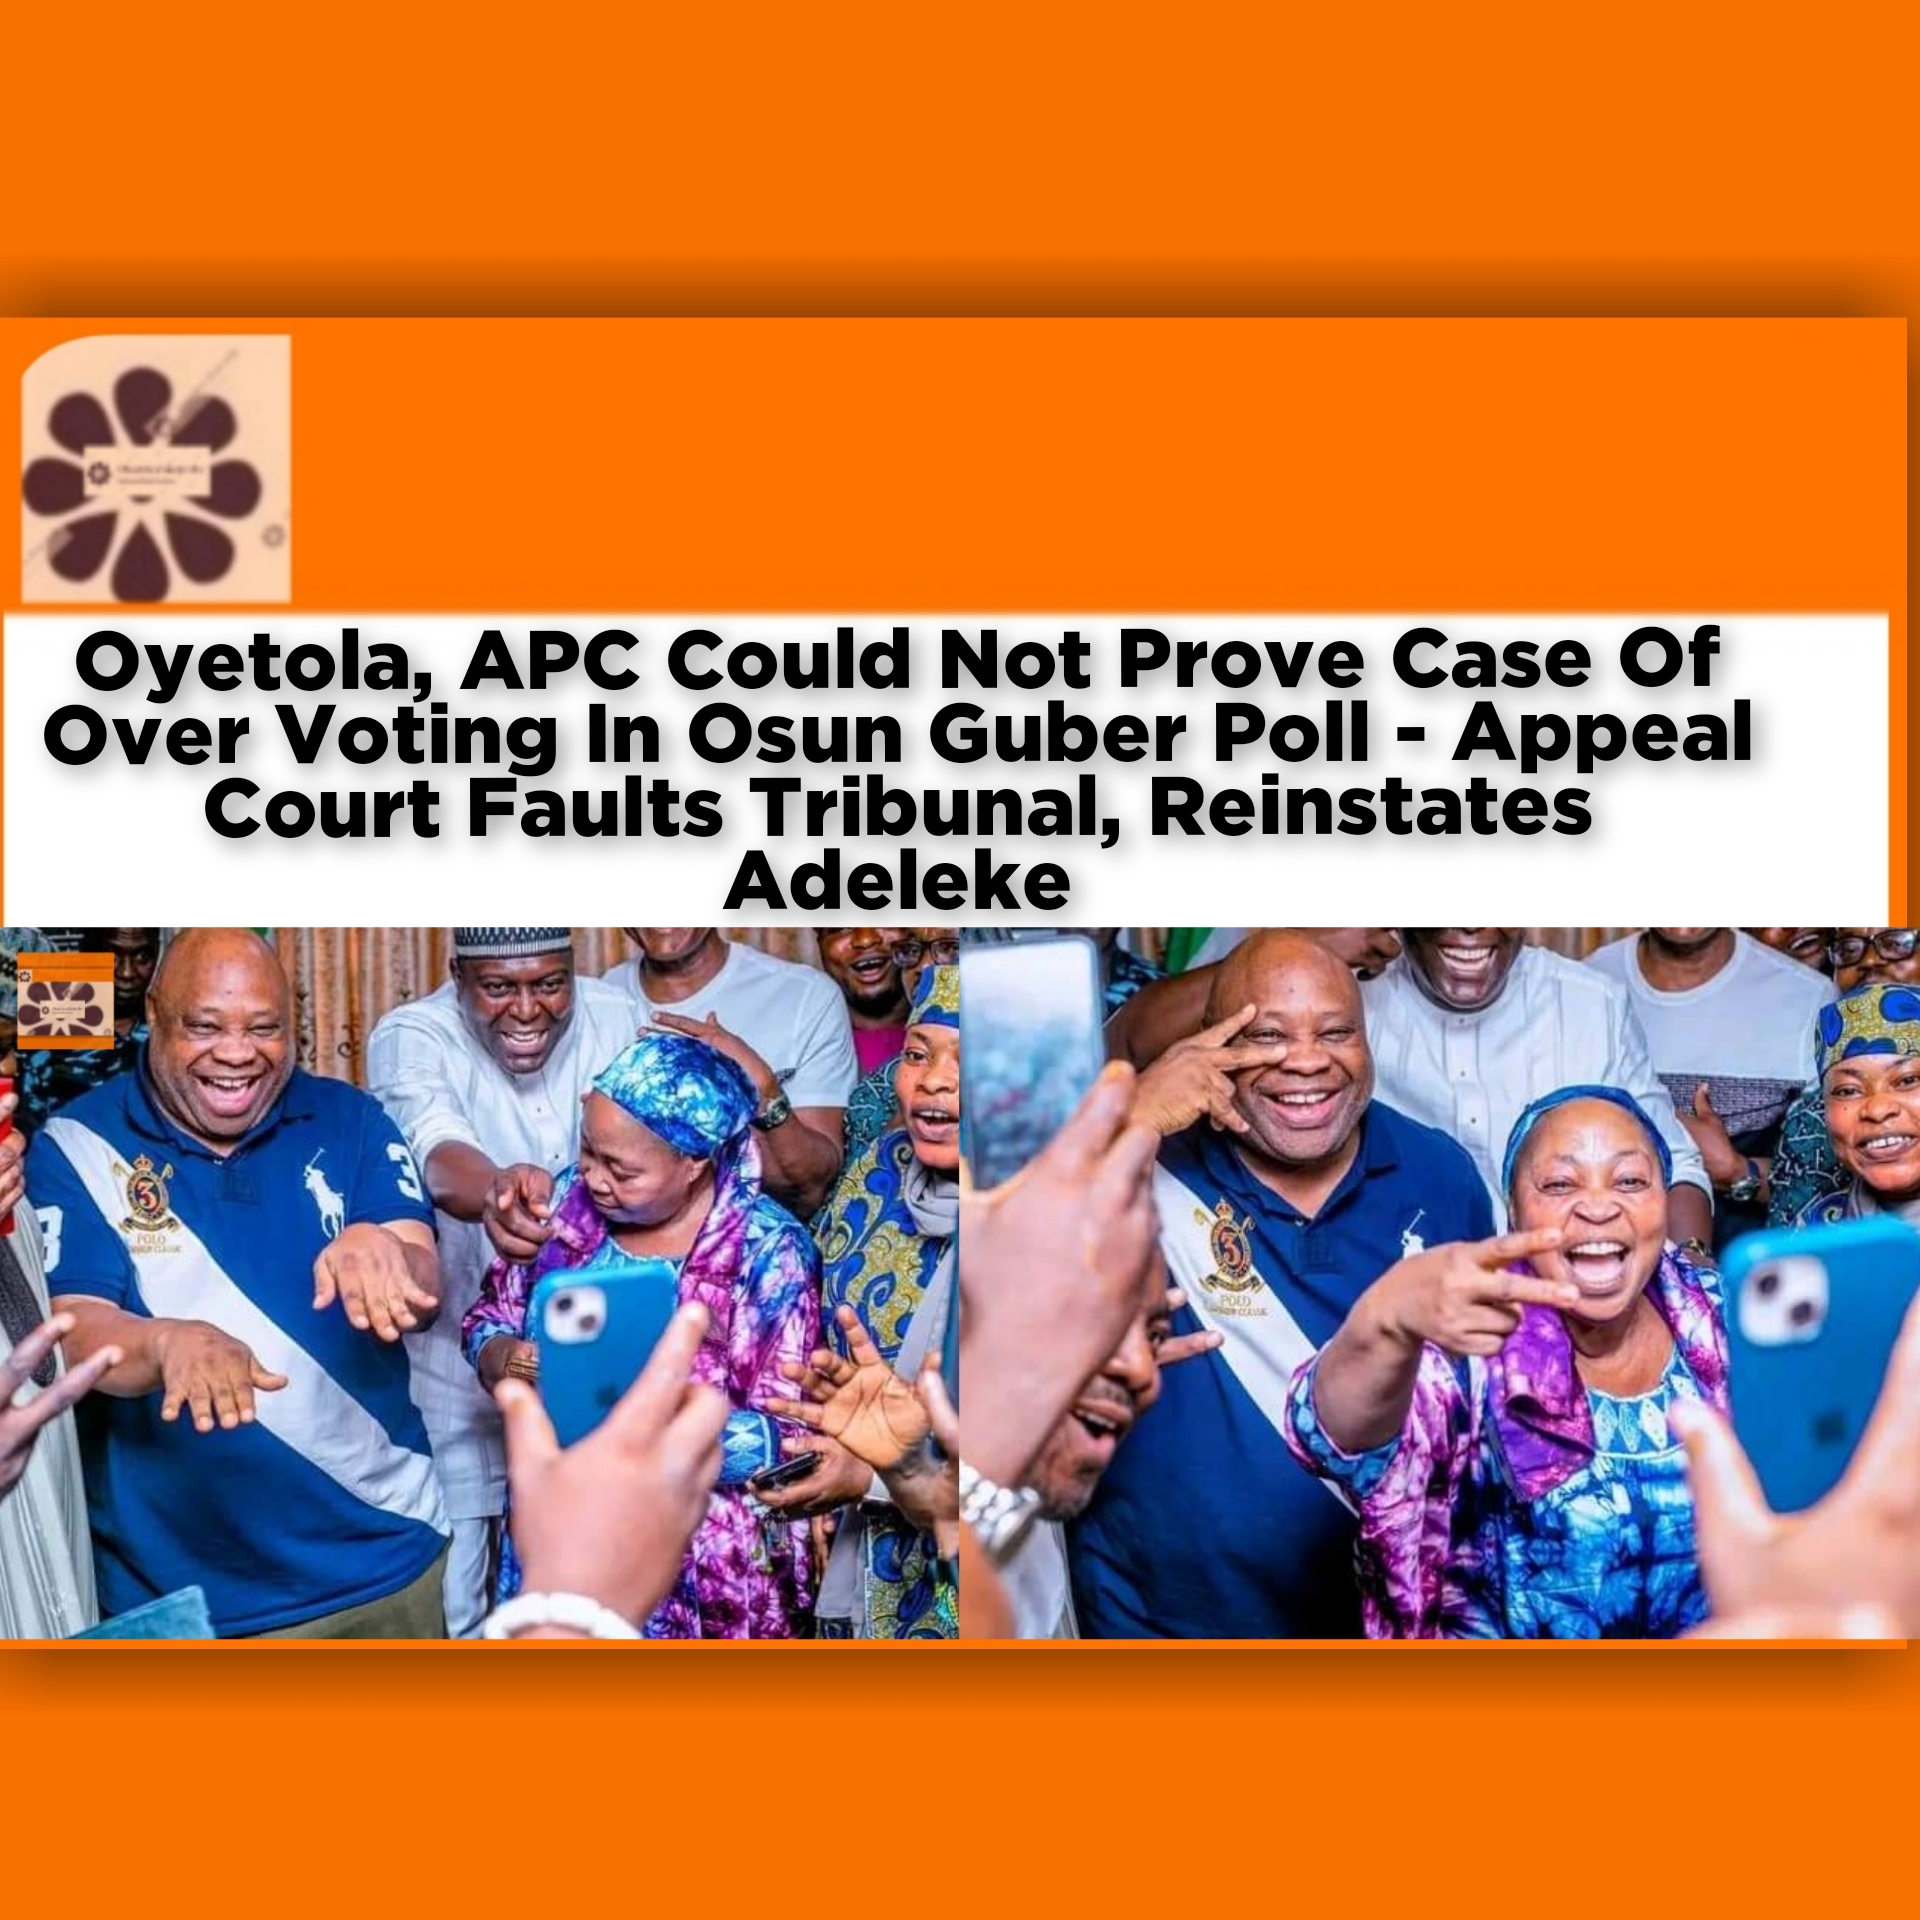 Oyetola, APC Could Not Prove Case Of Over Voting In Osun Guber Poll - Appeal Court Faults Tribunal, Reinstates Adeleke ~ OsazuwaAkonedo #Ademola #Abuja #Adeleke #APC #Appeal #Davido #job #OsazuwaAkonedo #Osun #Oyetola #PDP #politics #reinstates #Tribunal